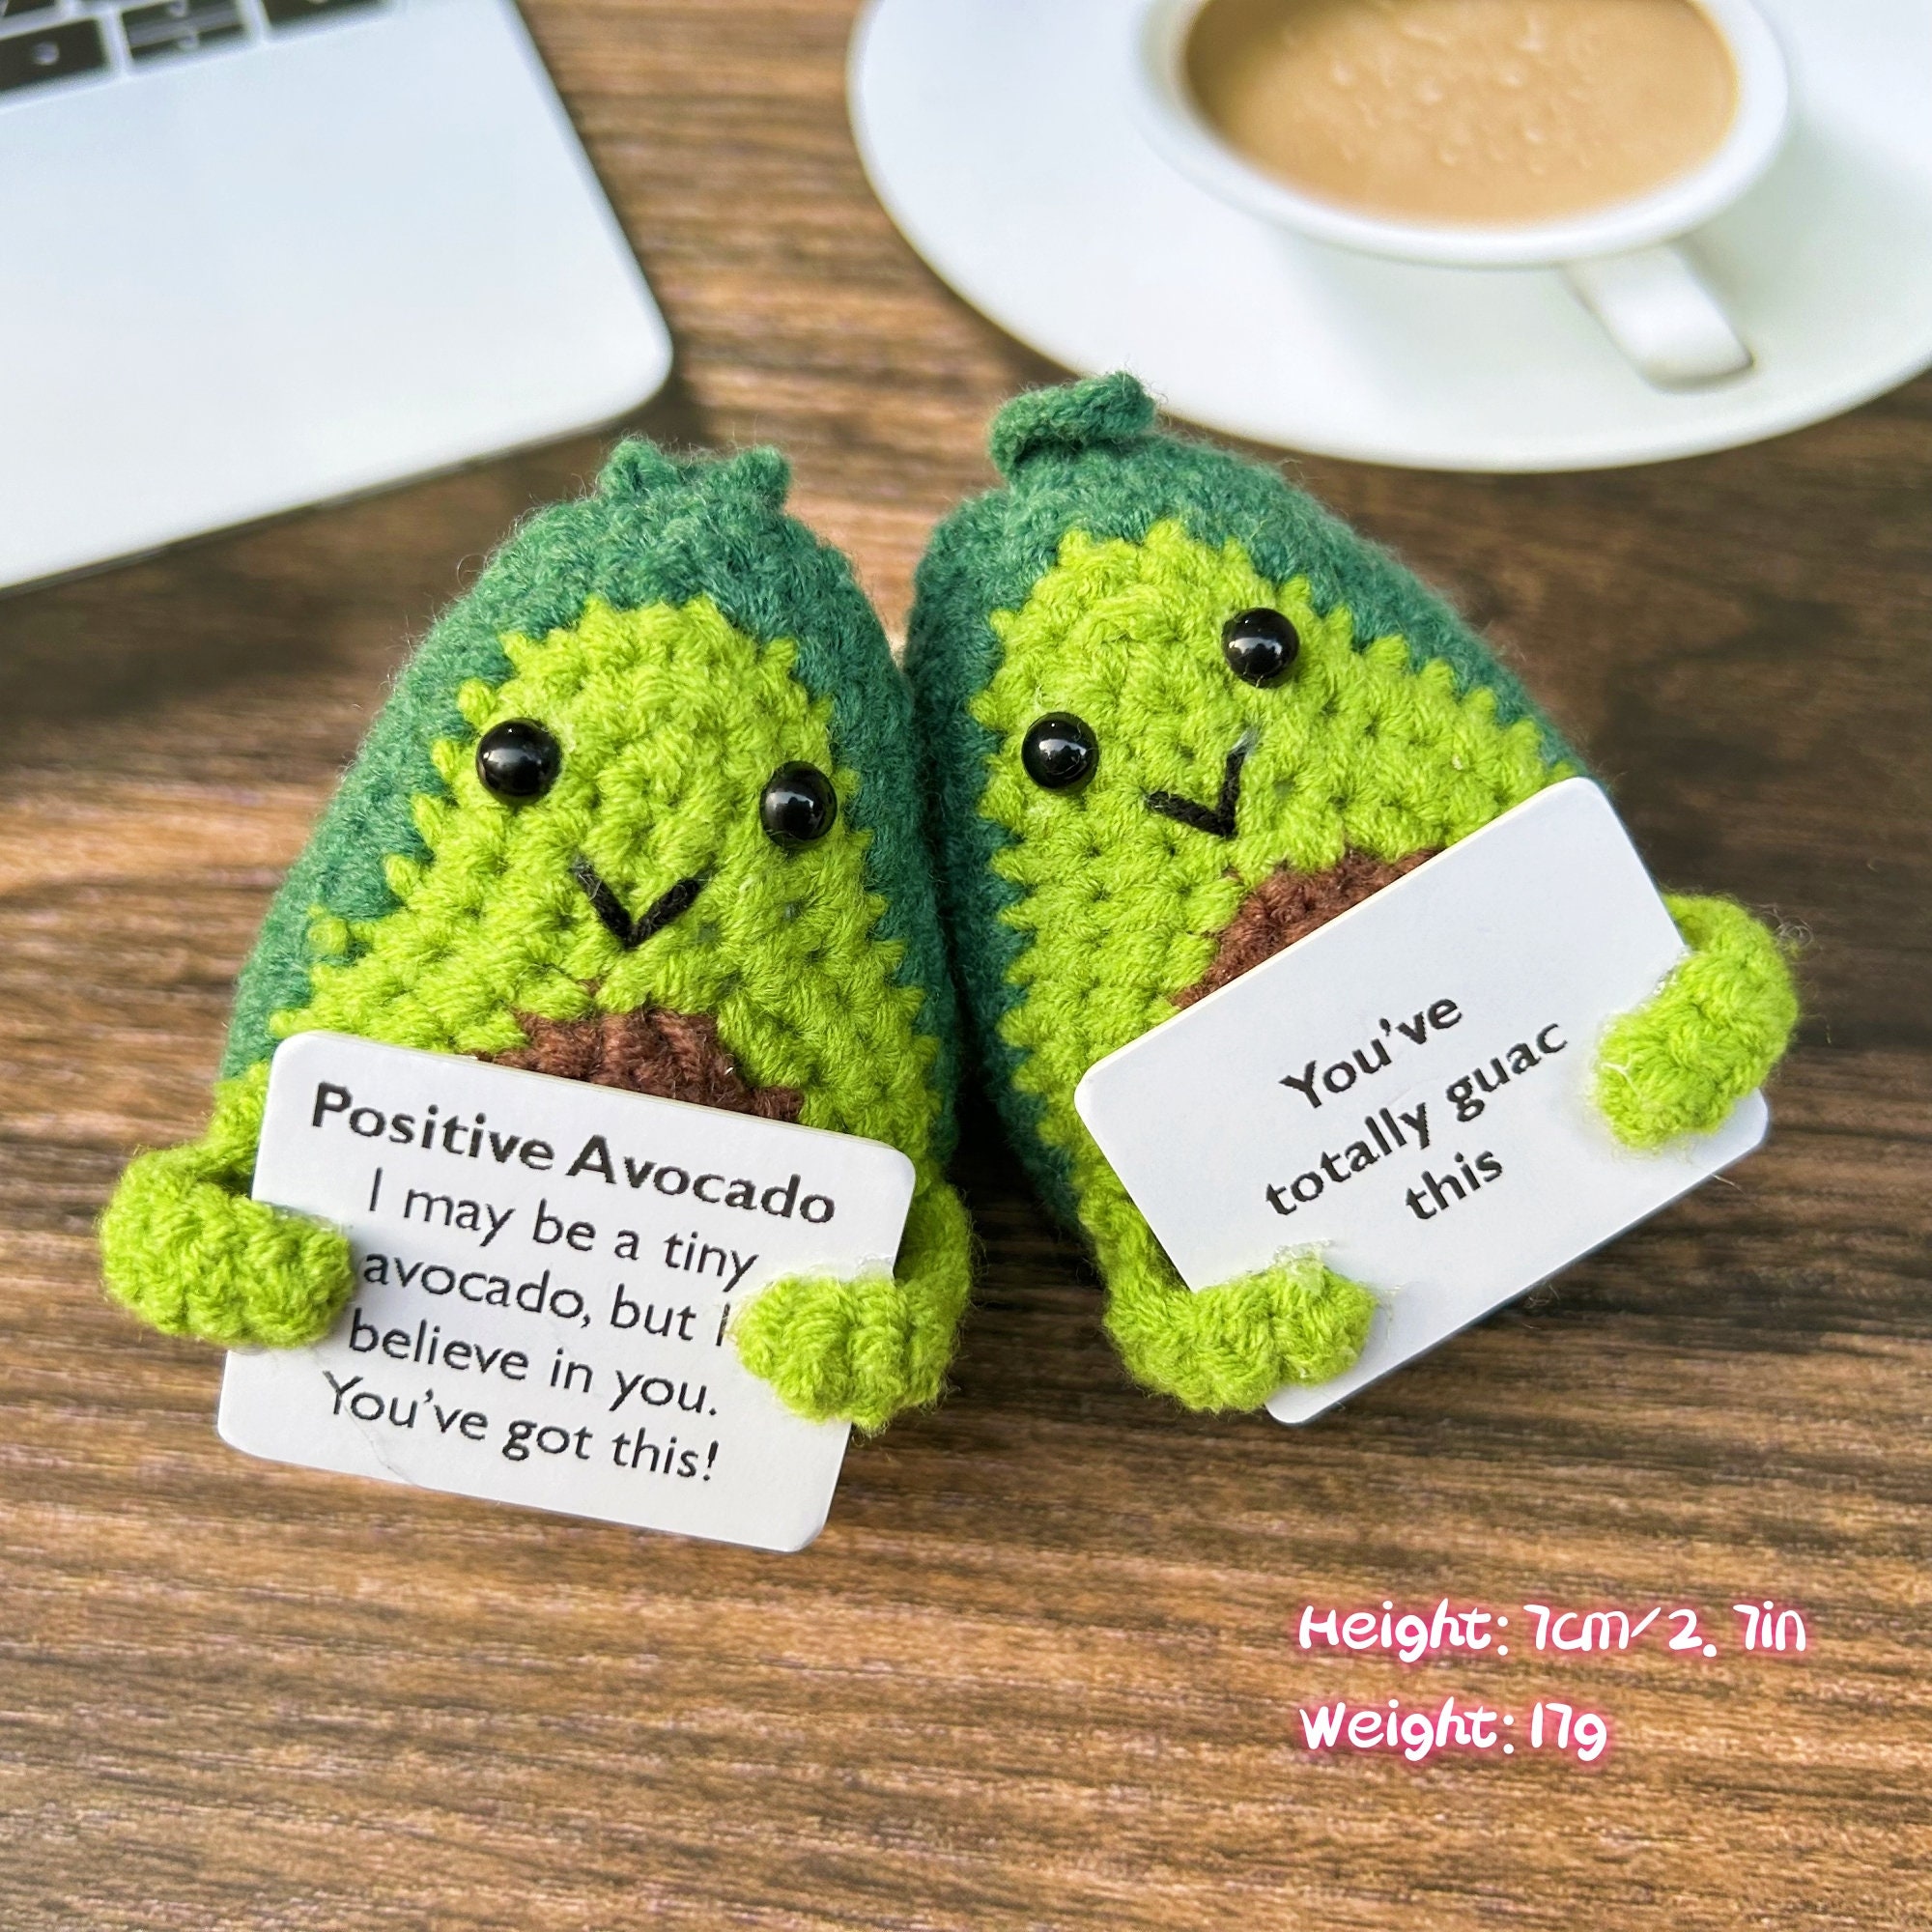 Awesome Avocado-motivational Gift for Family/friends/team